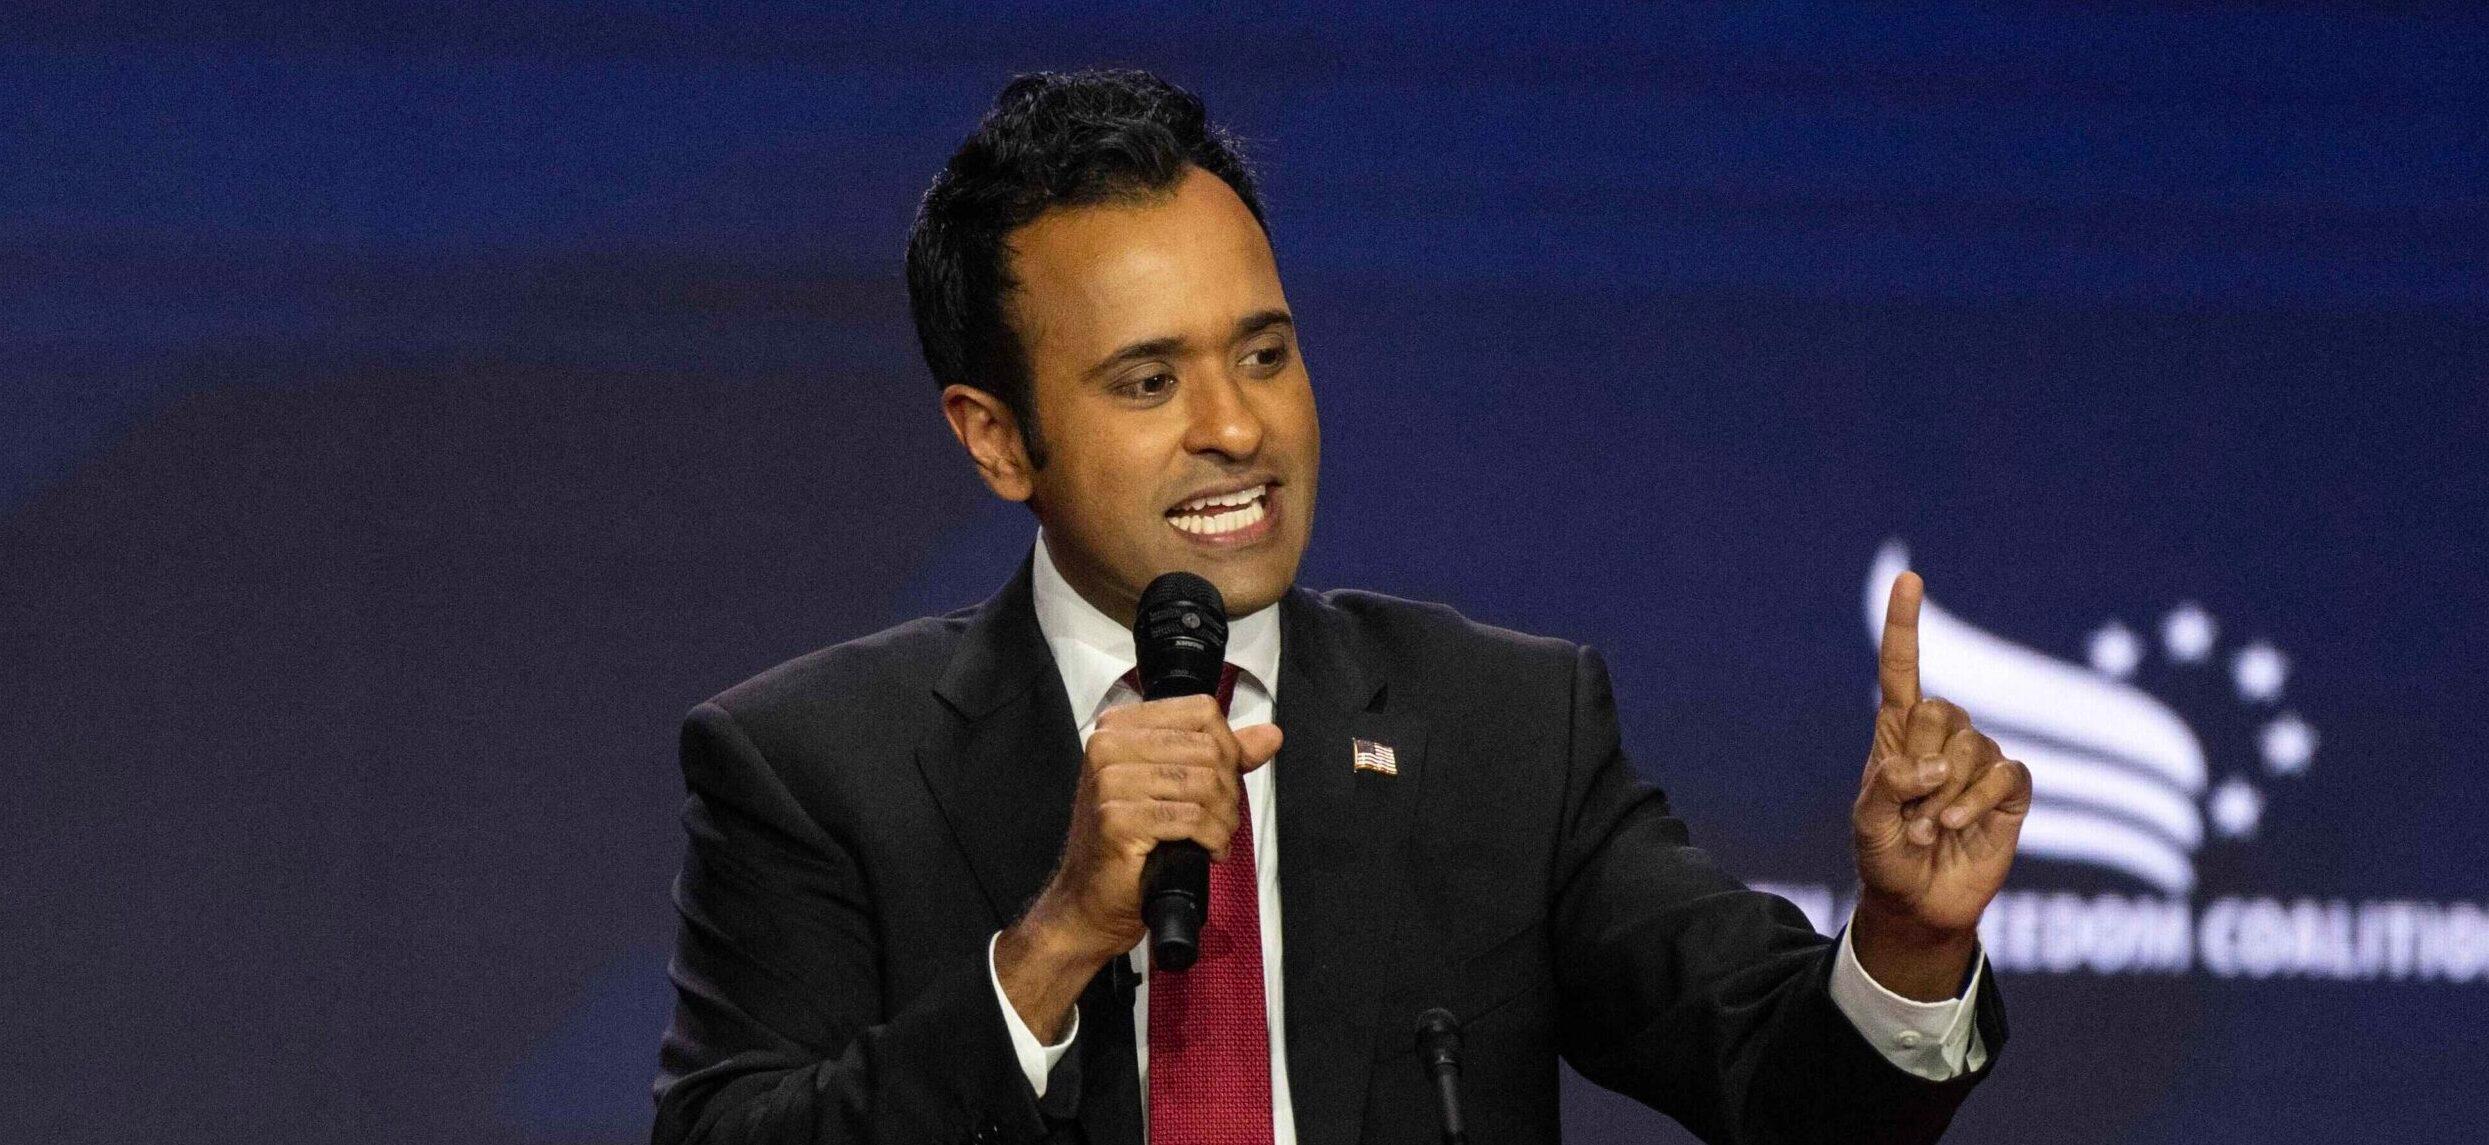 Vivek Ramaswamy, businessman and best selling author, a candidate for the 2024 Republican nomination for President of the US, makes remarks at the 2023 Faith and Freedom Coalition?s Road to Majority Policy Conference at the Washington Hilton Hotel on Washington, DC